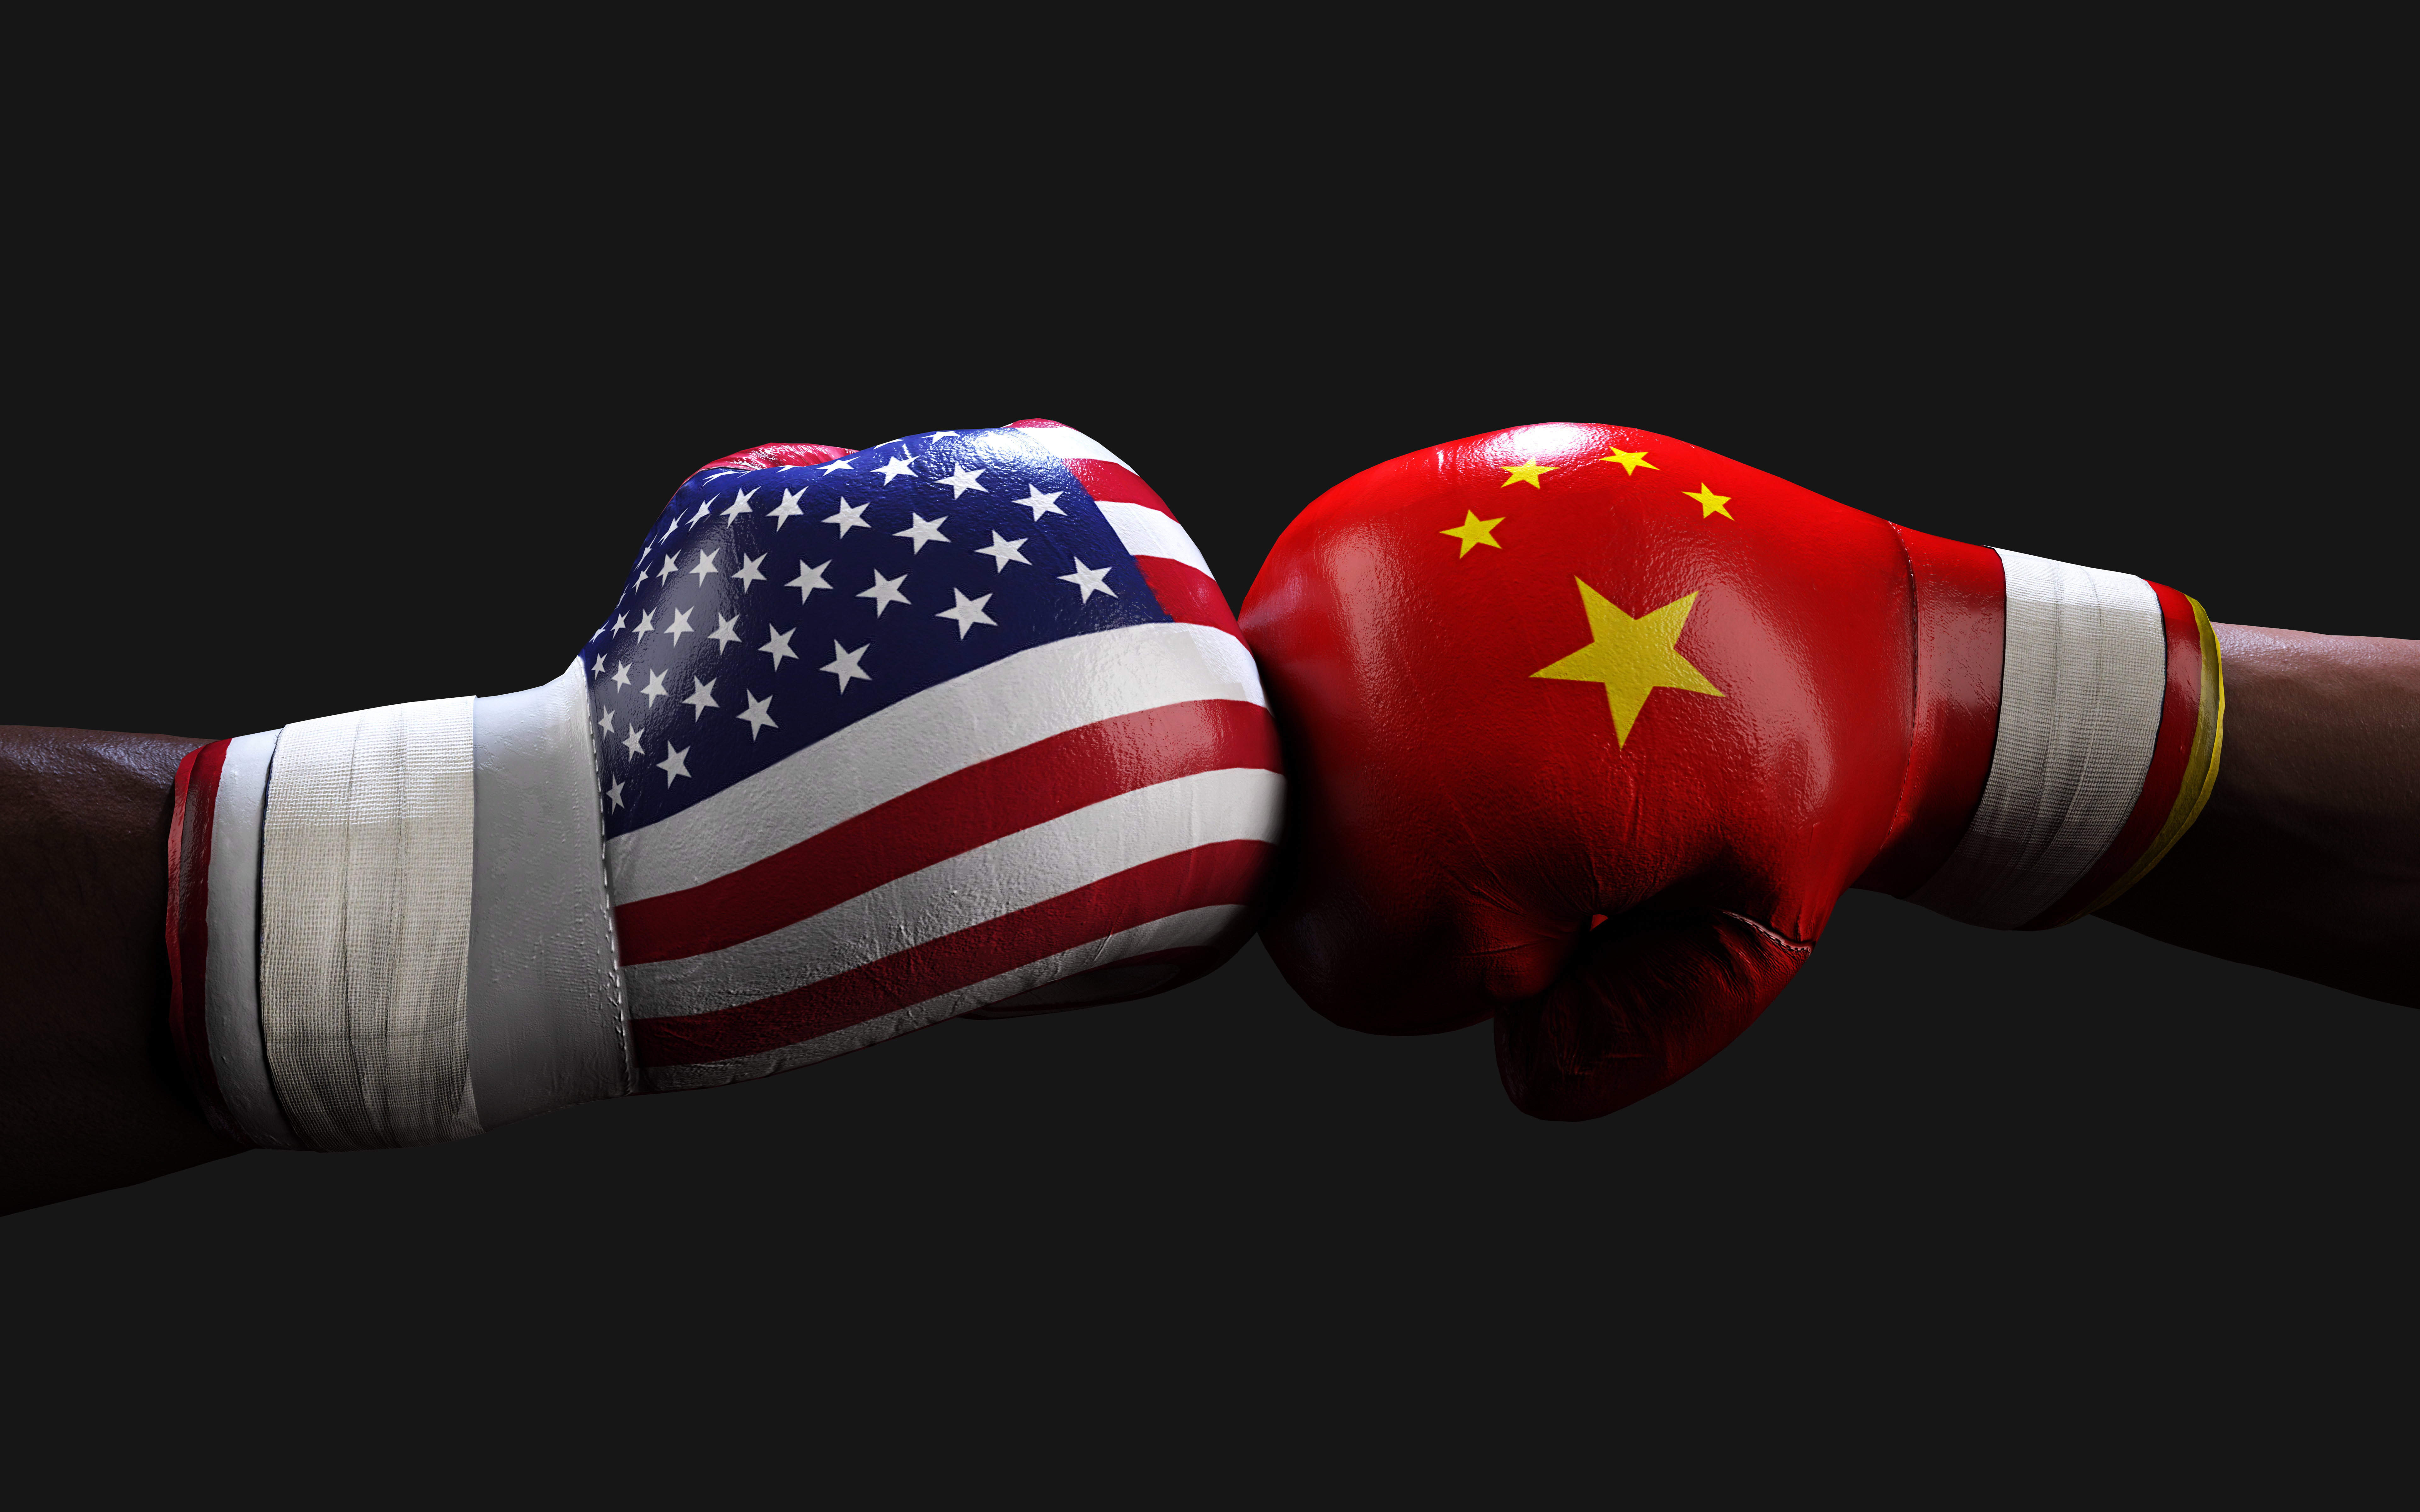 Hands of opposing boxers. Hand on left wears boxing glove with U.S. flag patter; hand or right wears boxing glove with Chinese flag pattern.